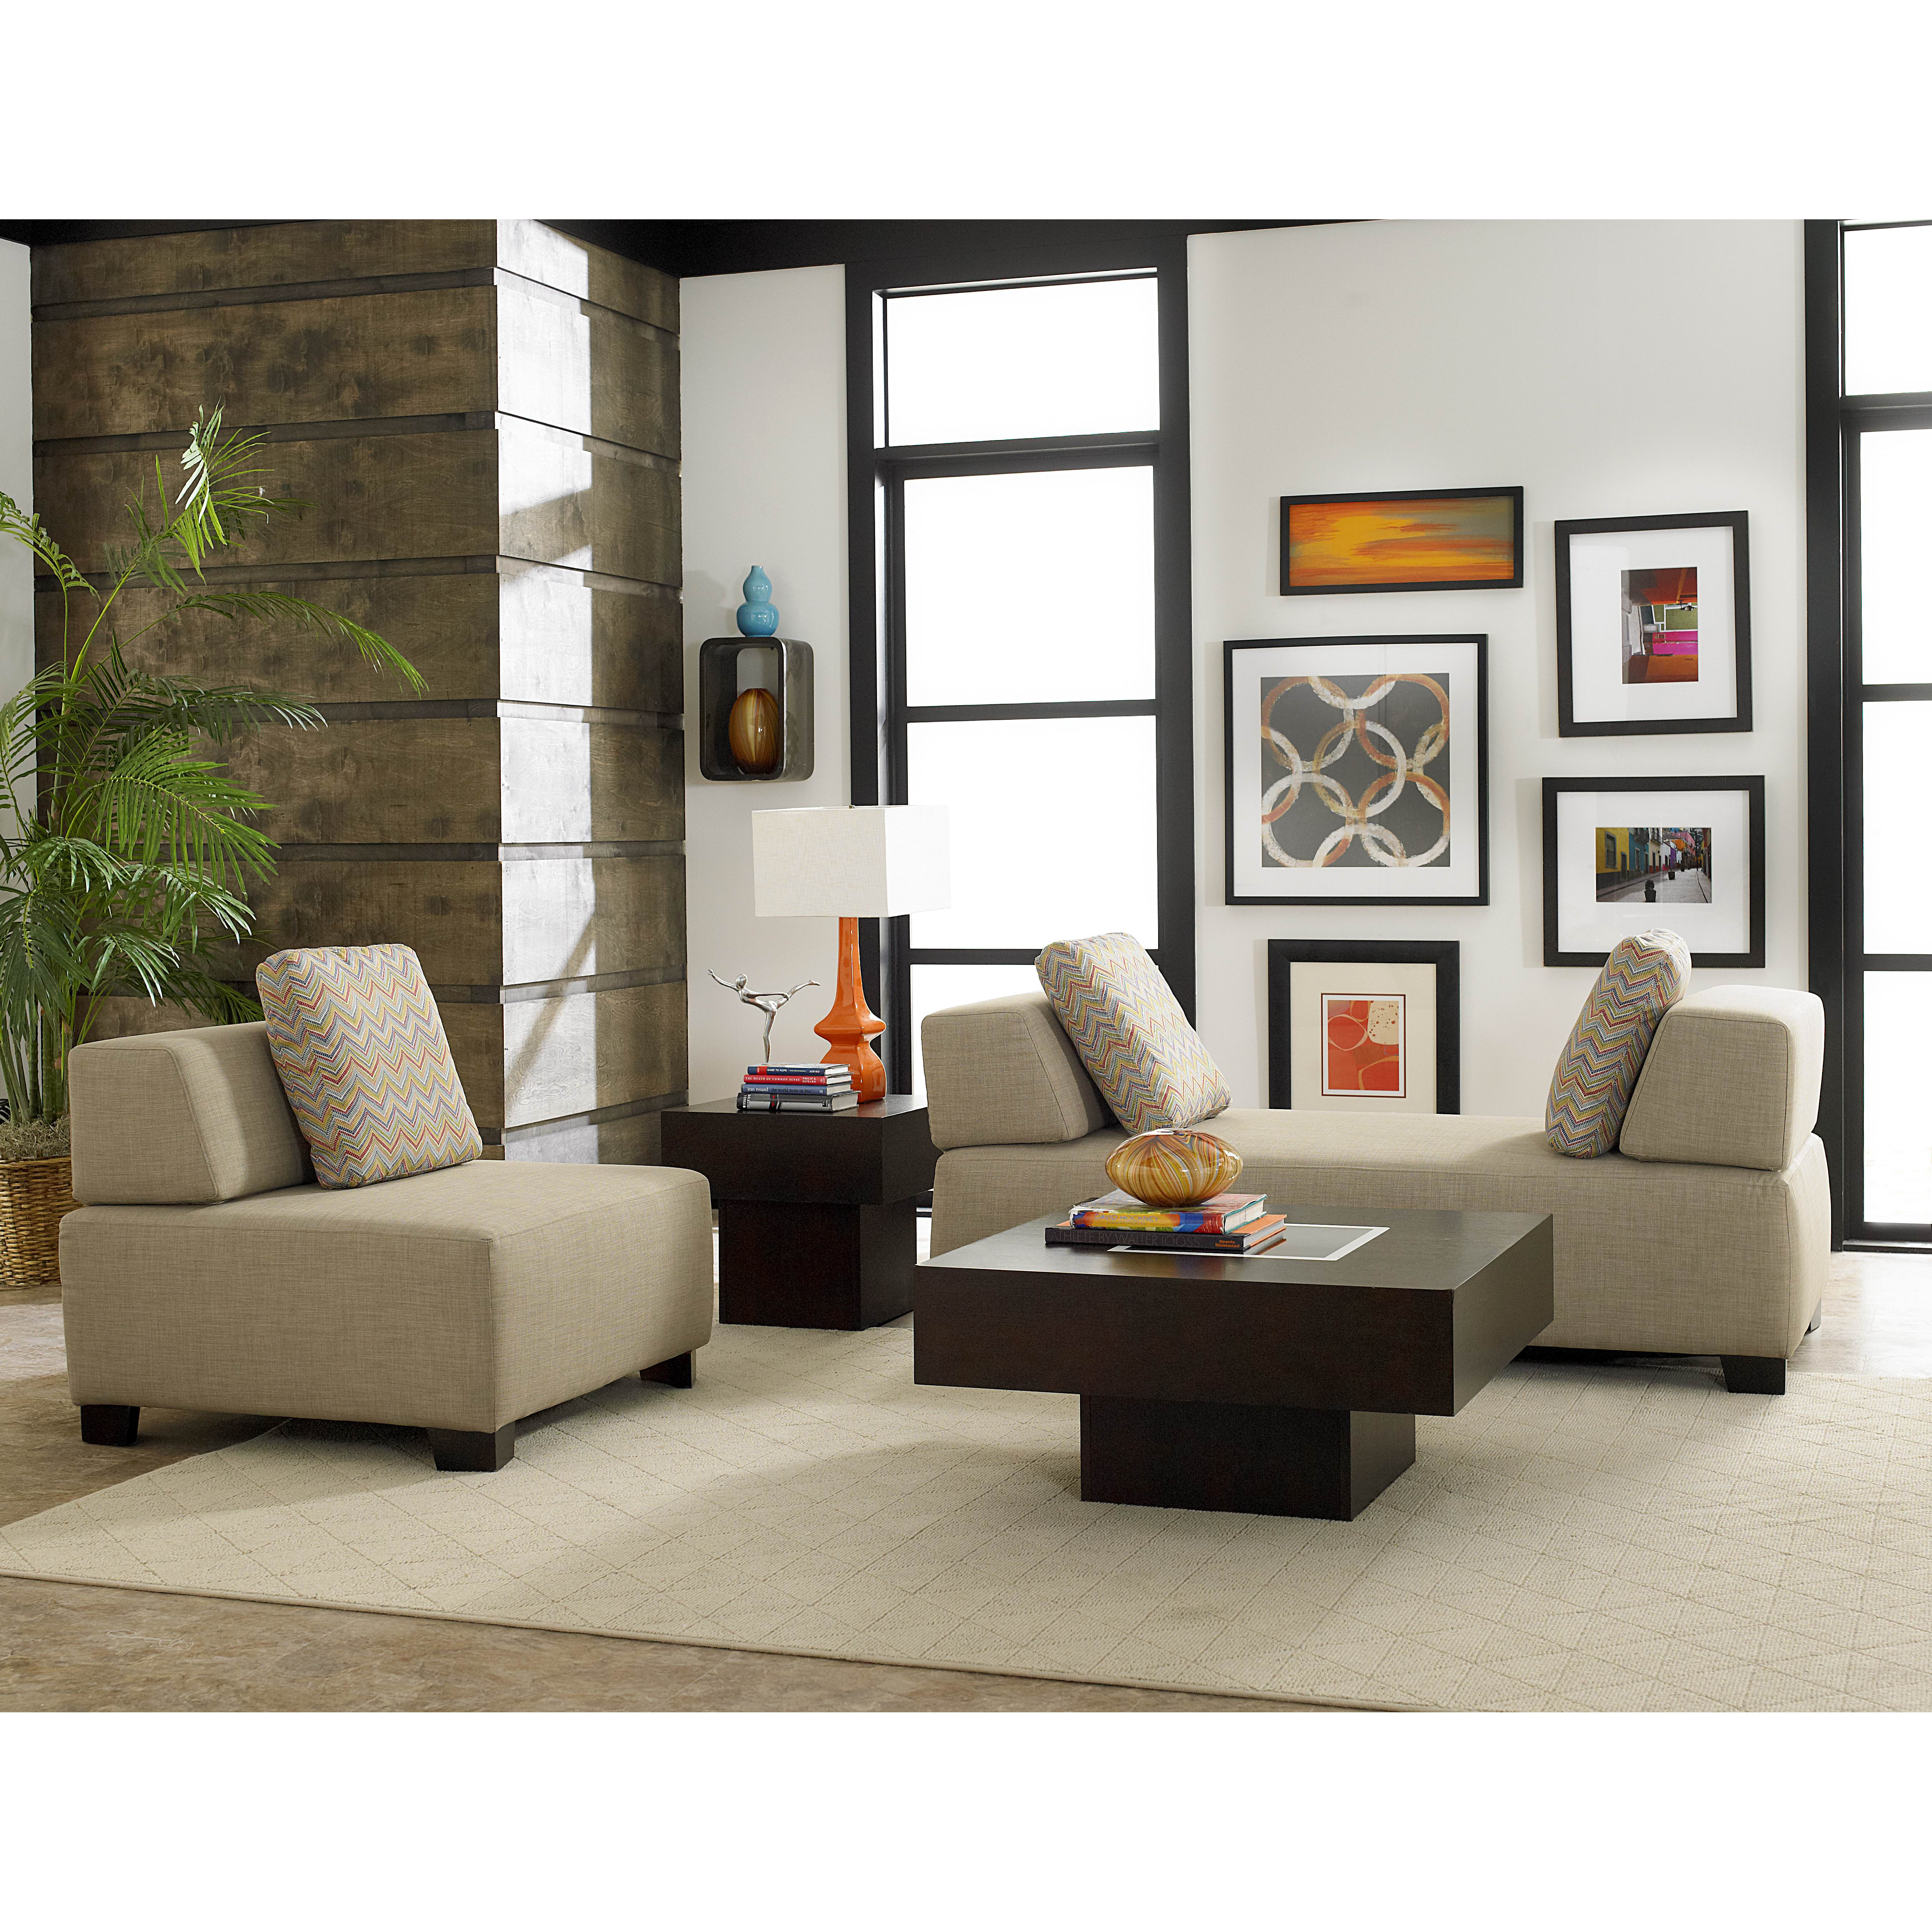 Unique Woodhaven Living Room Furniture with Simple Decor